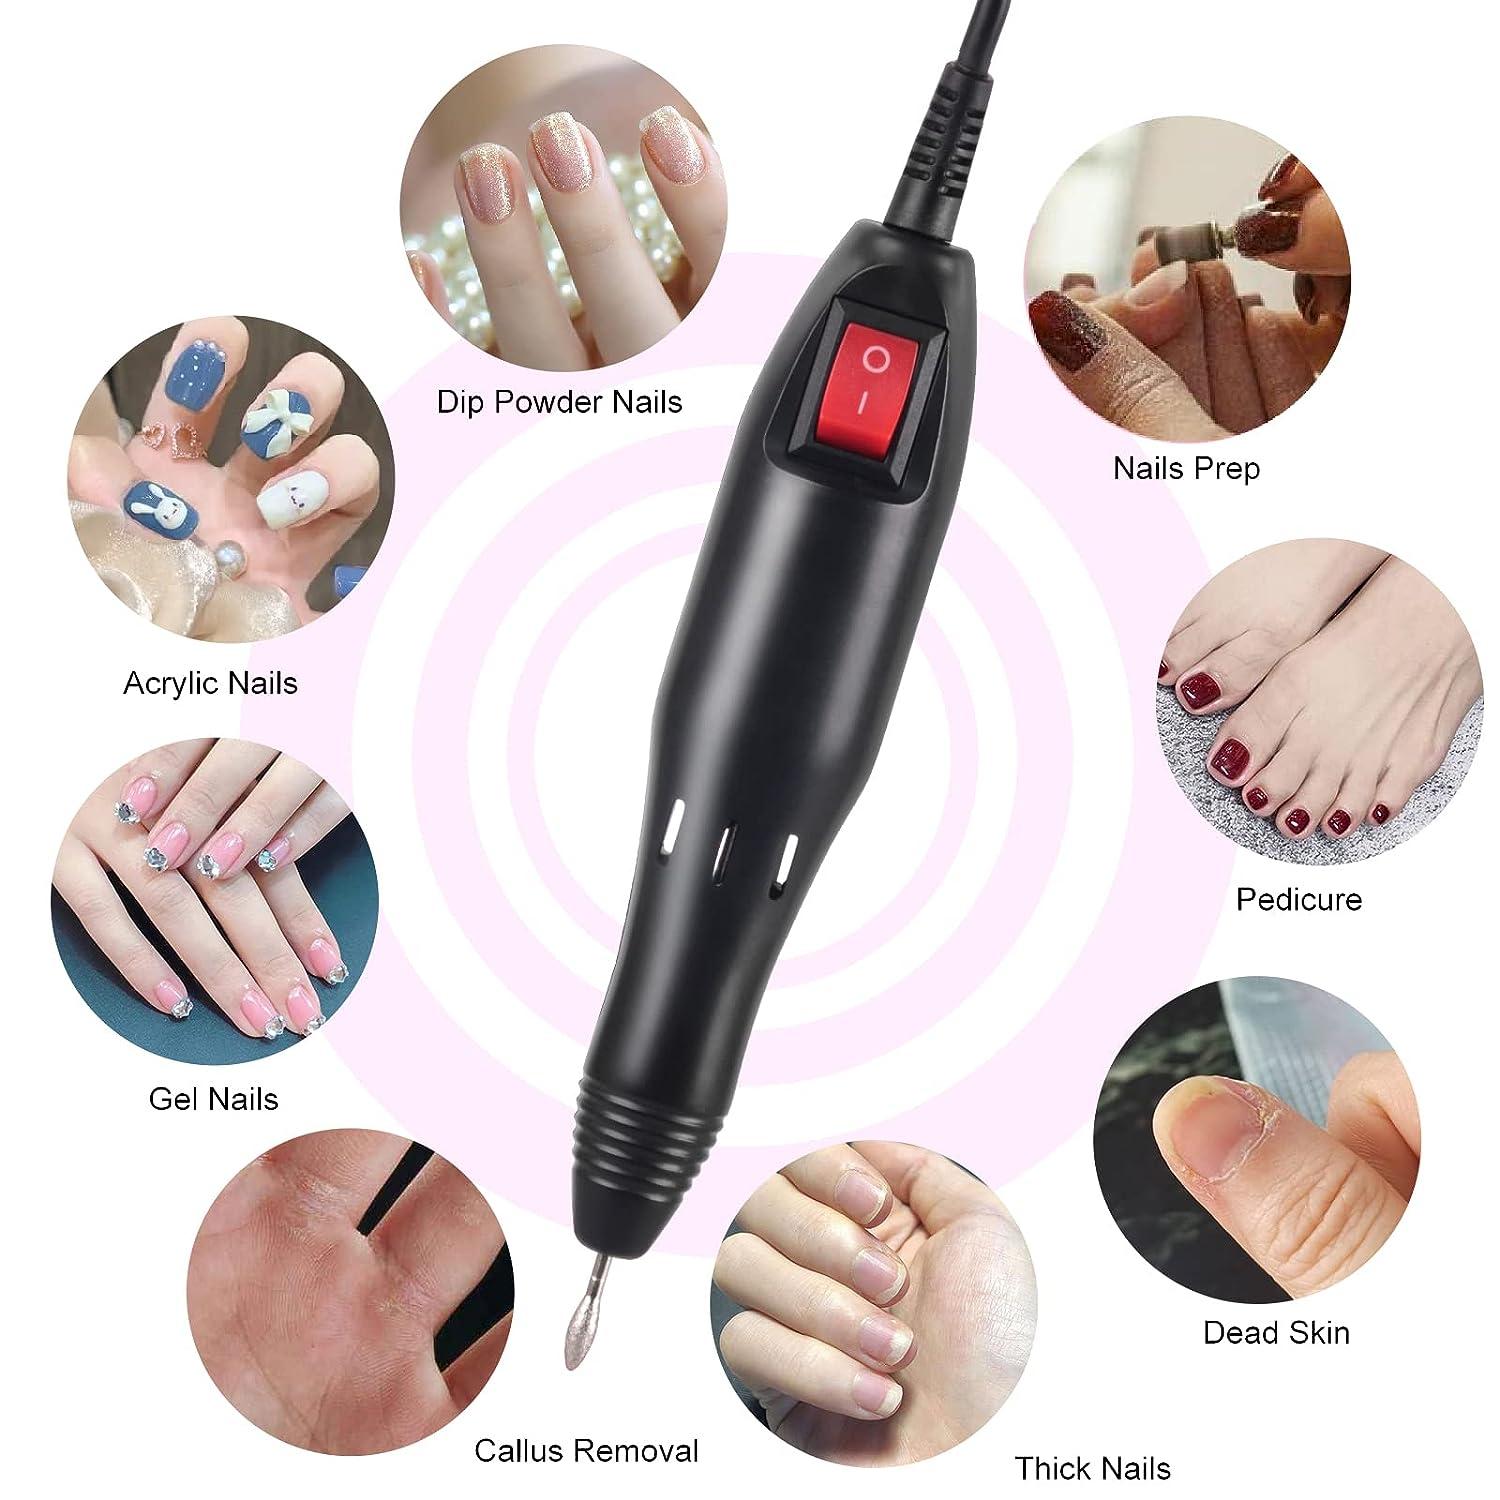 Wholesale Professional Nail Art Drill Set 6 Bits Electric Manicure Nail  Tool Pen Manicure Pedicure Machine Nail Grinder Polisher Feet Care From  Beasy113, $12.1 | DHgate.Com